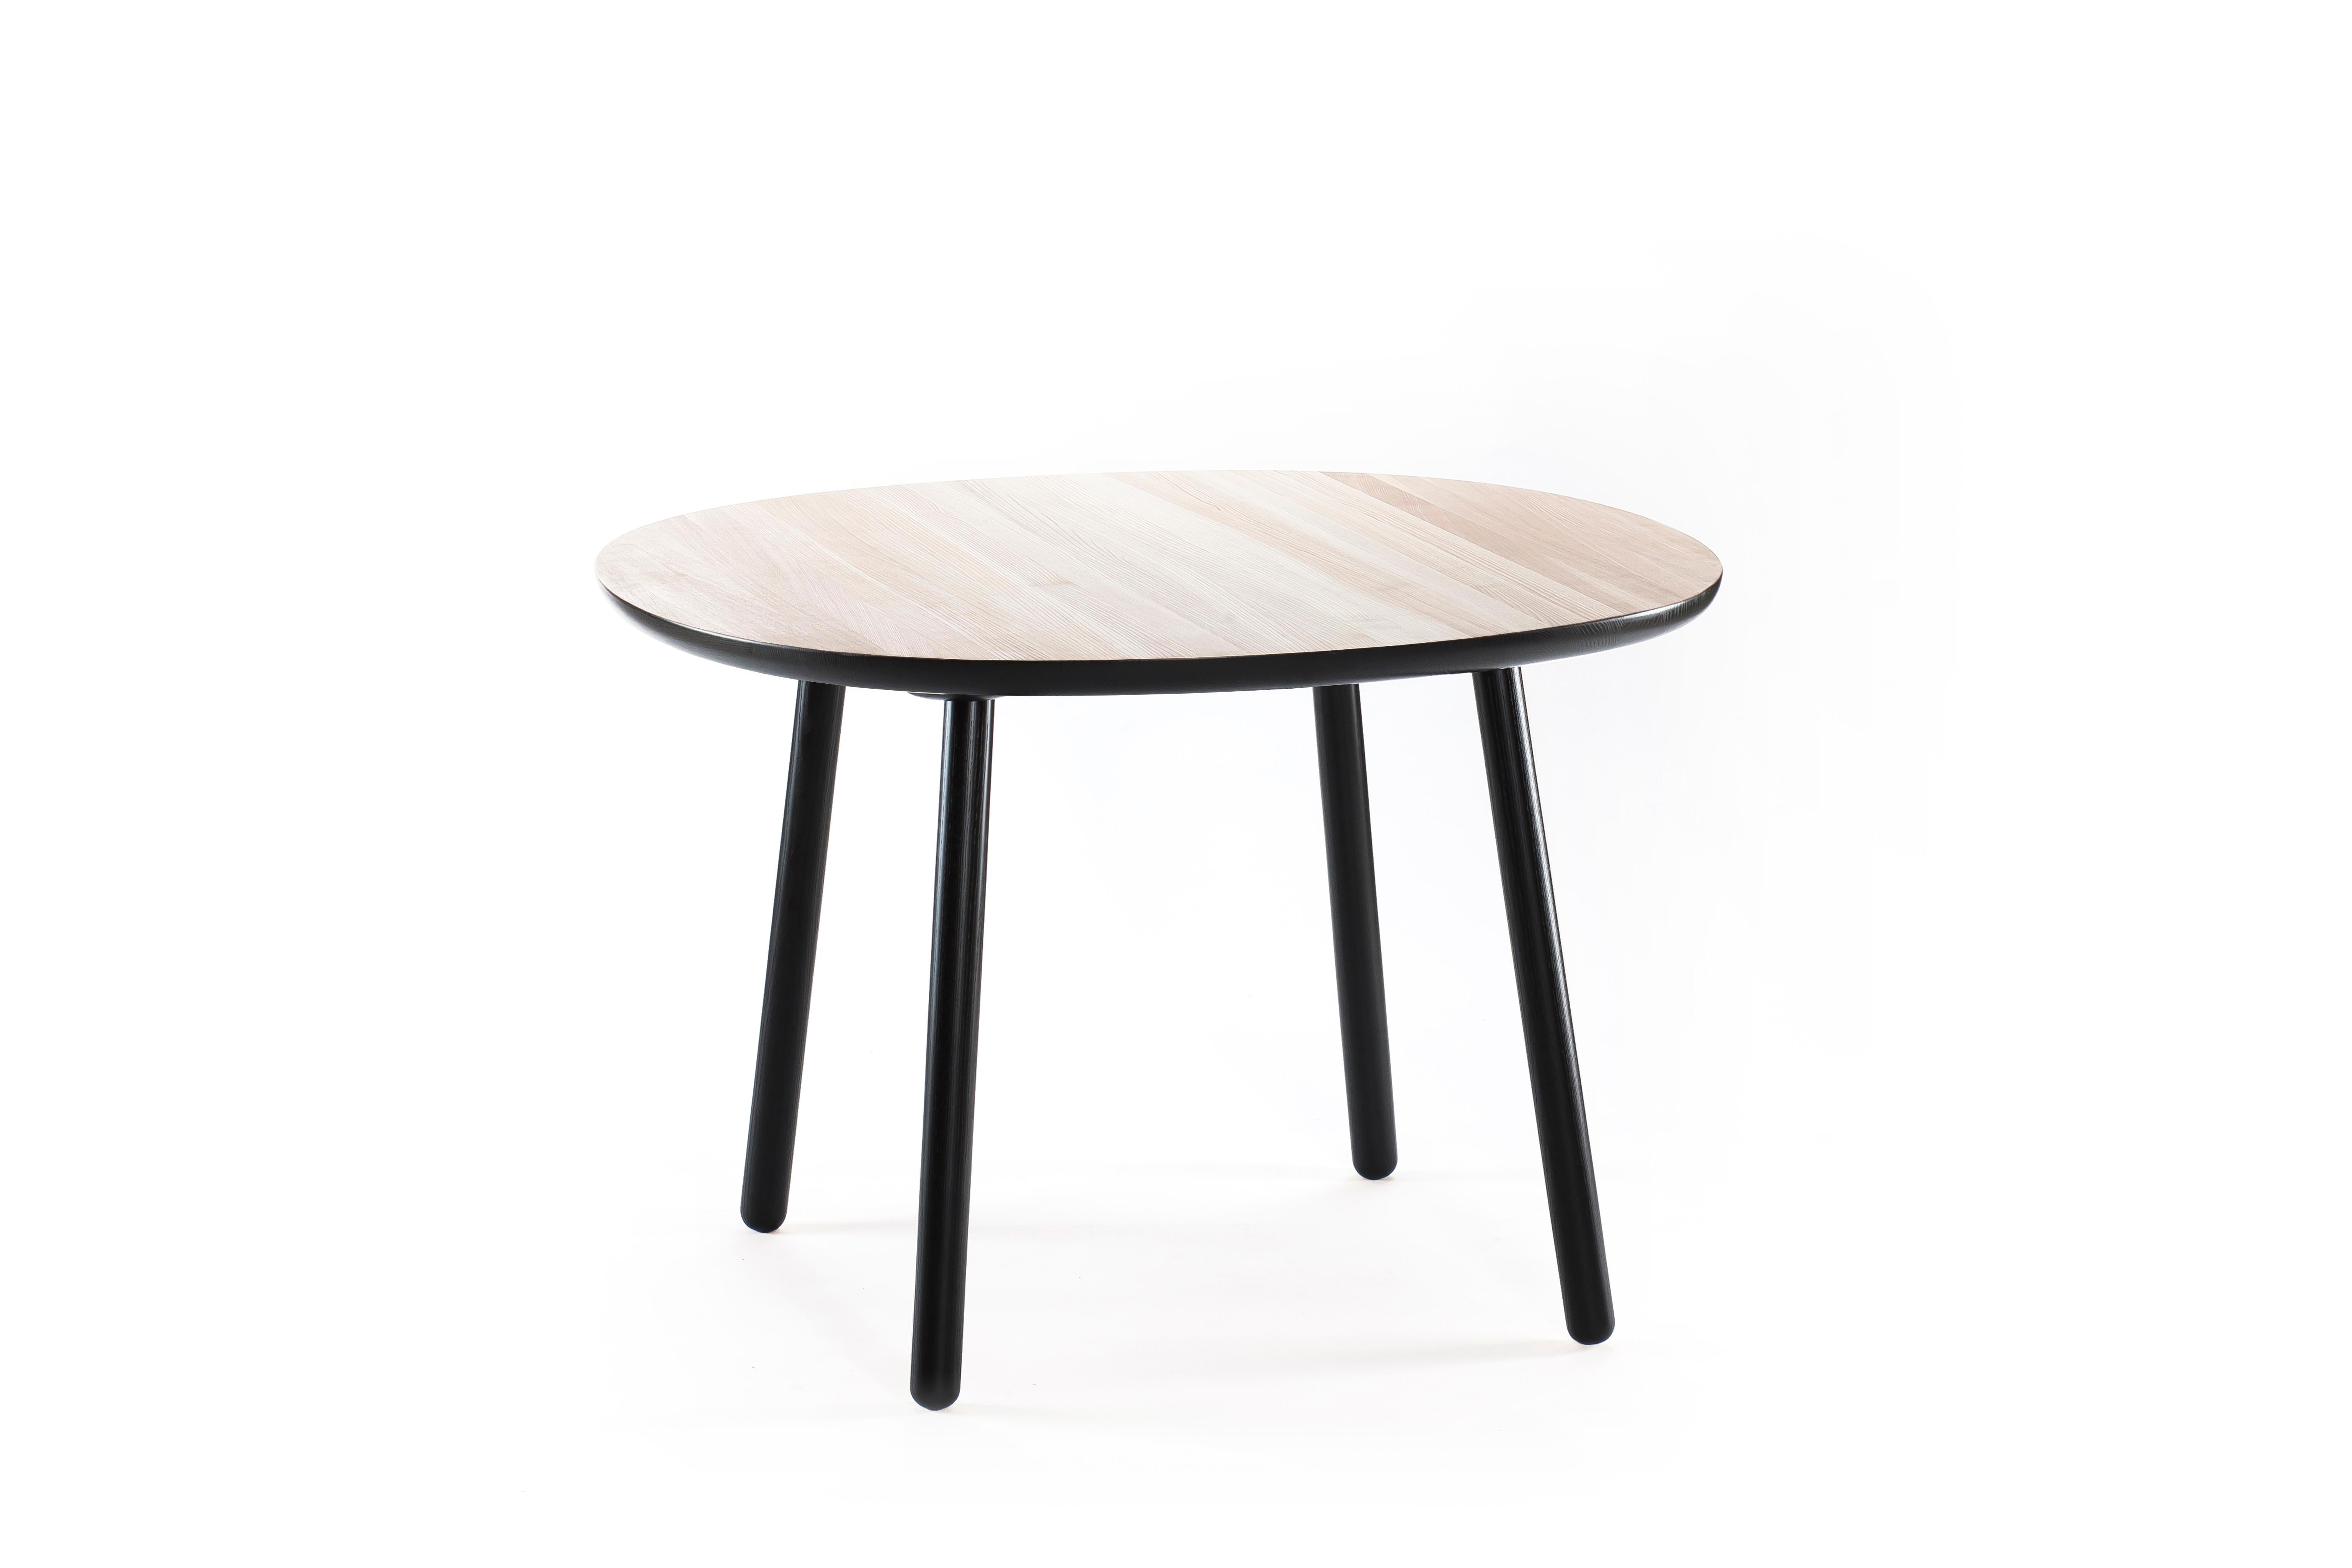 Table's modest and clean form is decided by a simple but lasting construction - each leg has its own base under the tabletop making the table strong enough to serve generations to come. The roundish tabletop contour is designed to create an inviting